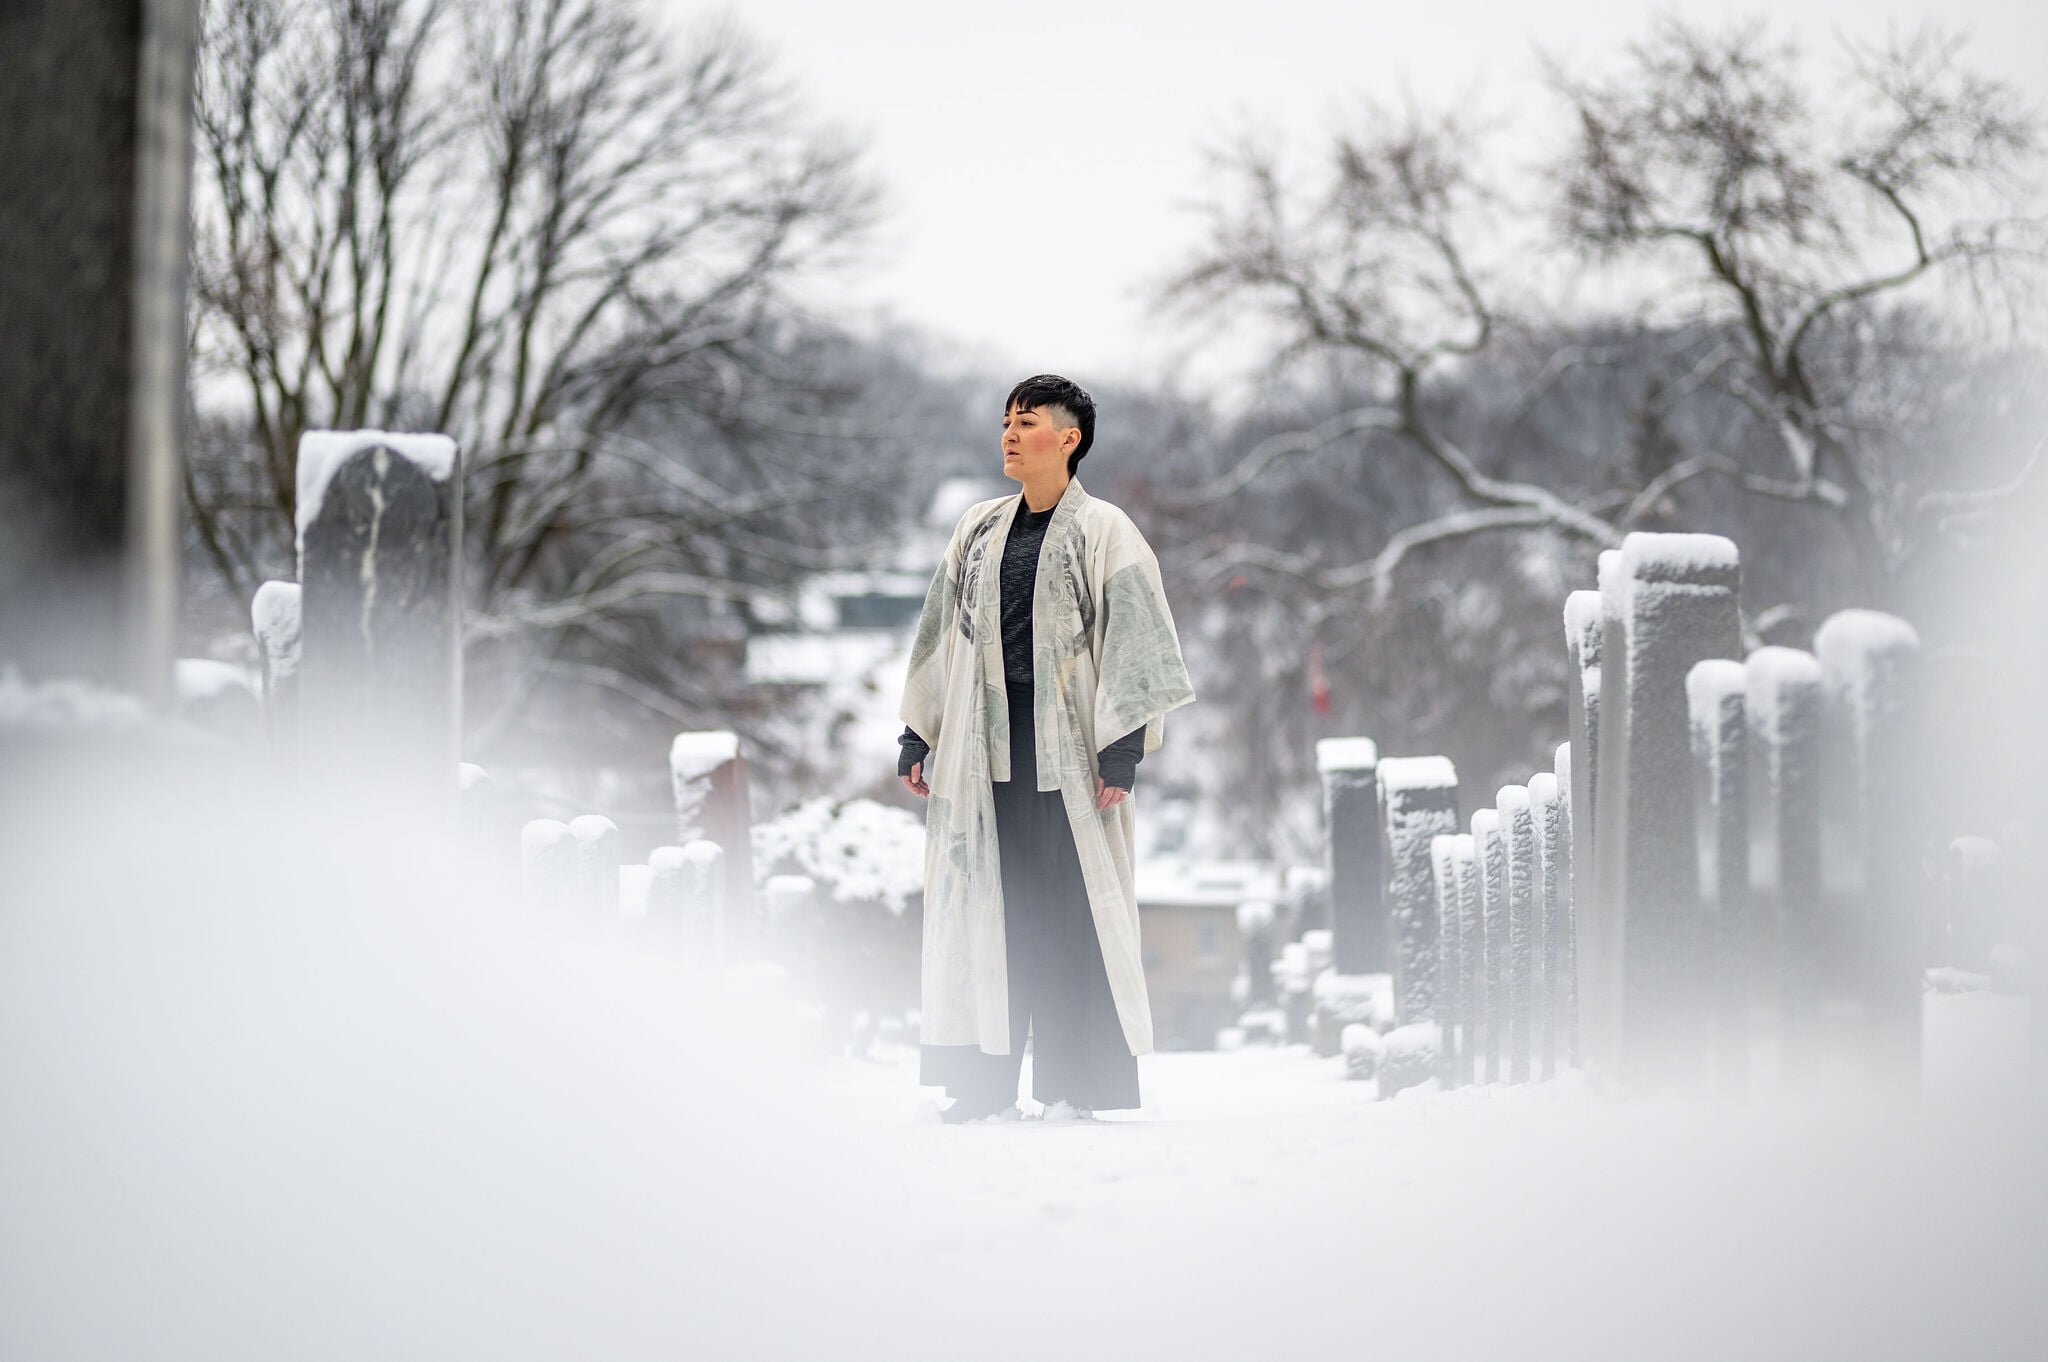  “Soprano  Teiya Kasahara ’s ethereal arrangement of “He was despised,” for example, is performed in a snow-covered graveyard, with  Kasahara  walking among the tombstones while singing in English, their own voice providing a circular supporting harm